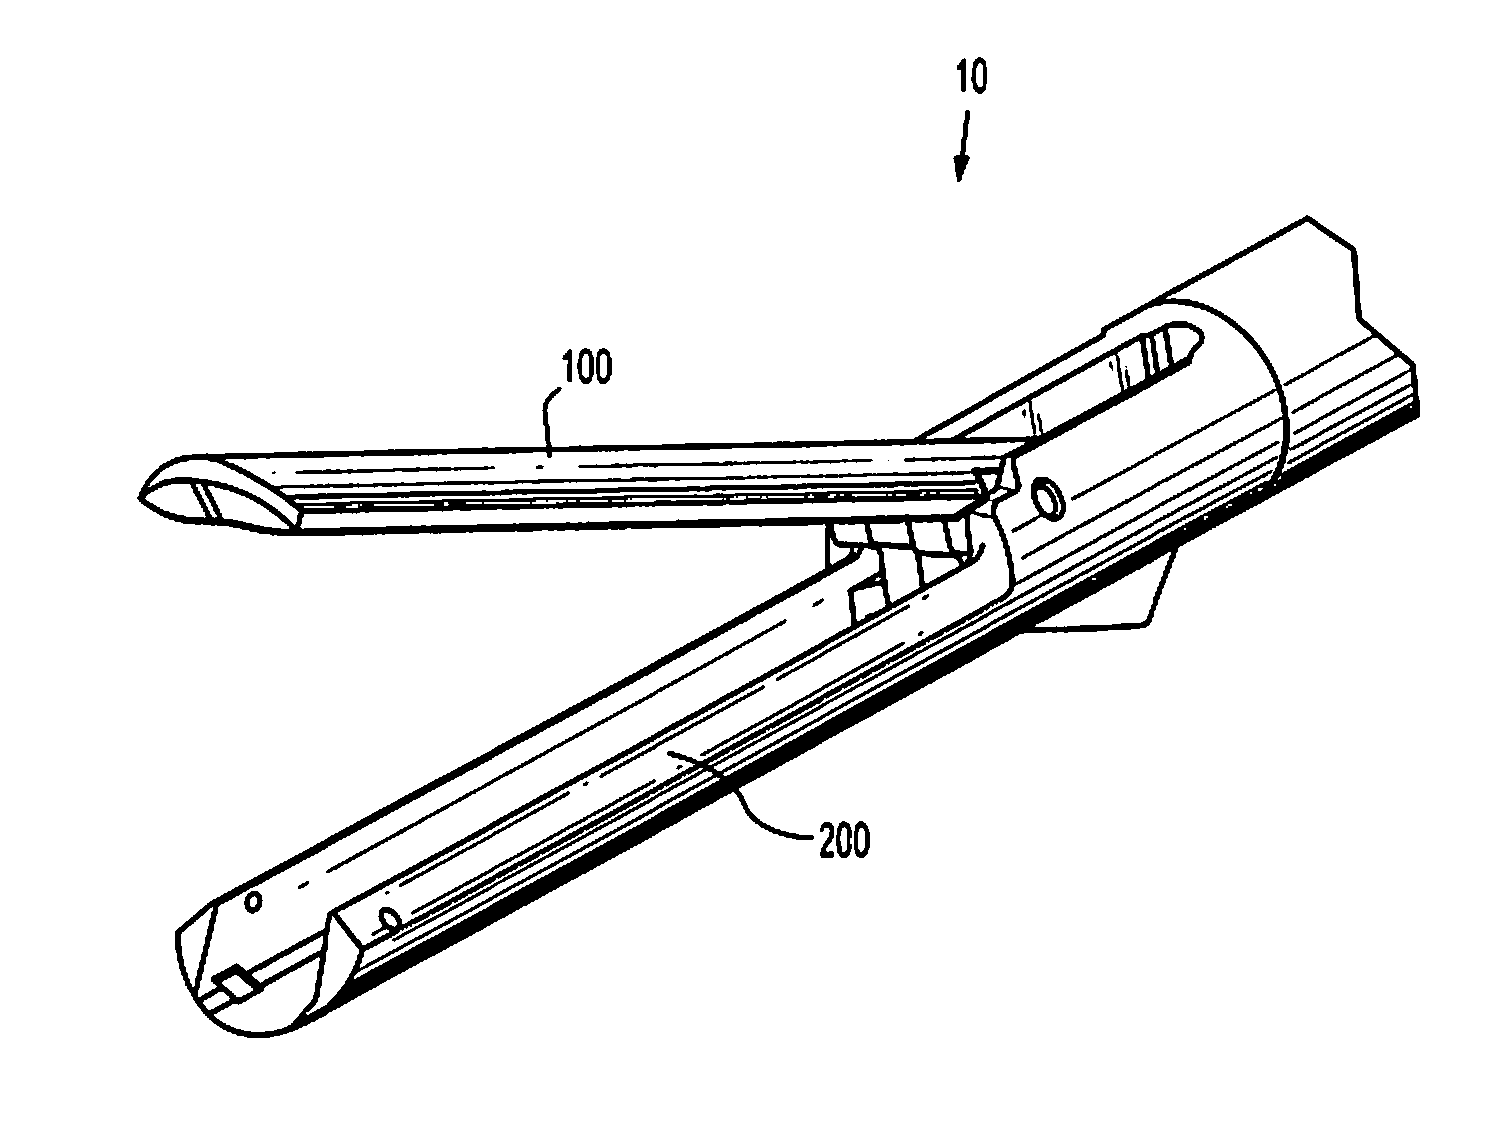 Surgical stapling device with captive anvil